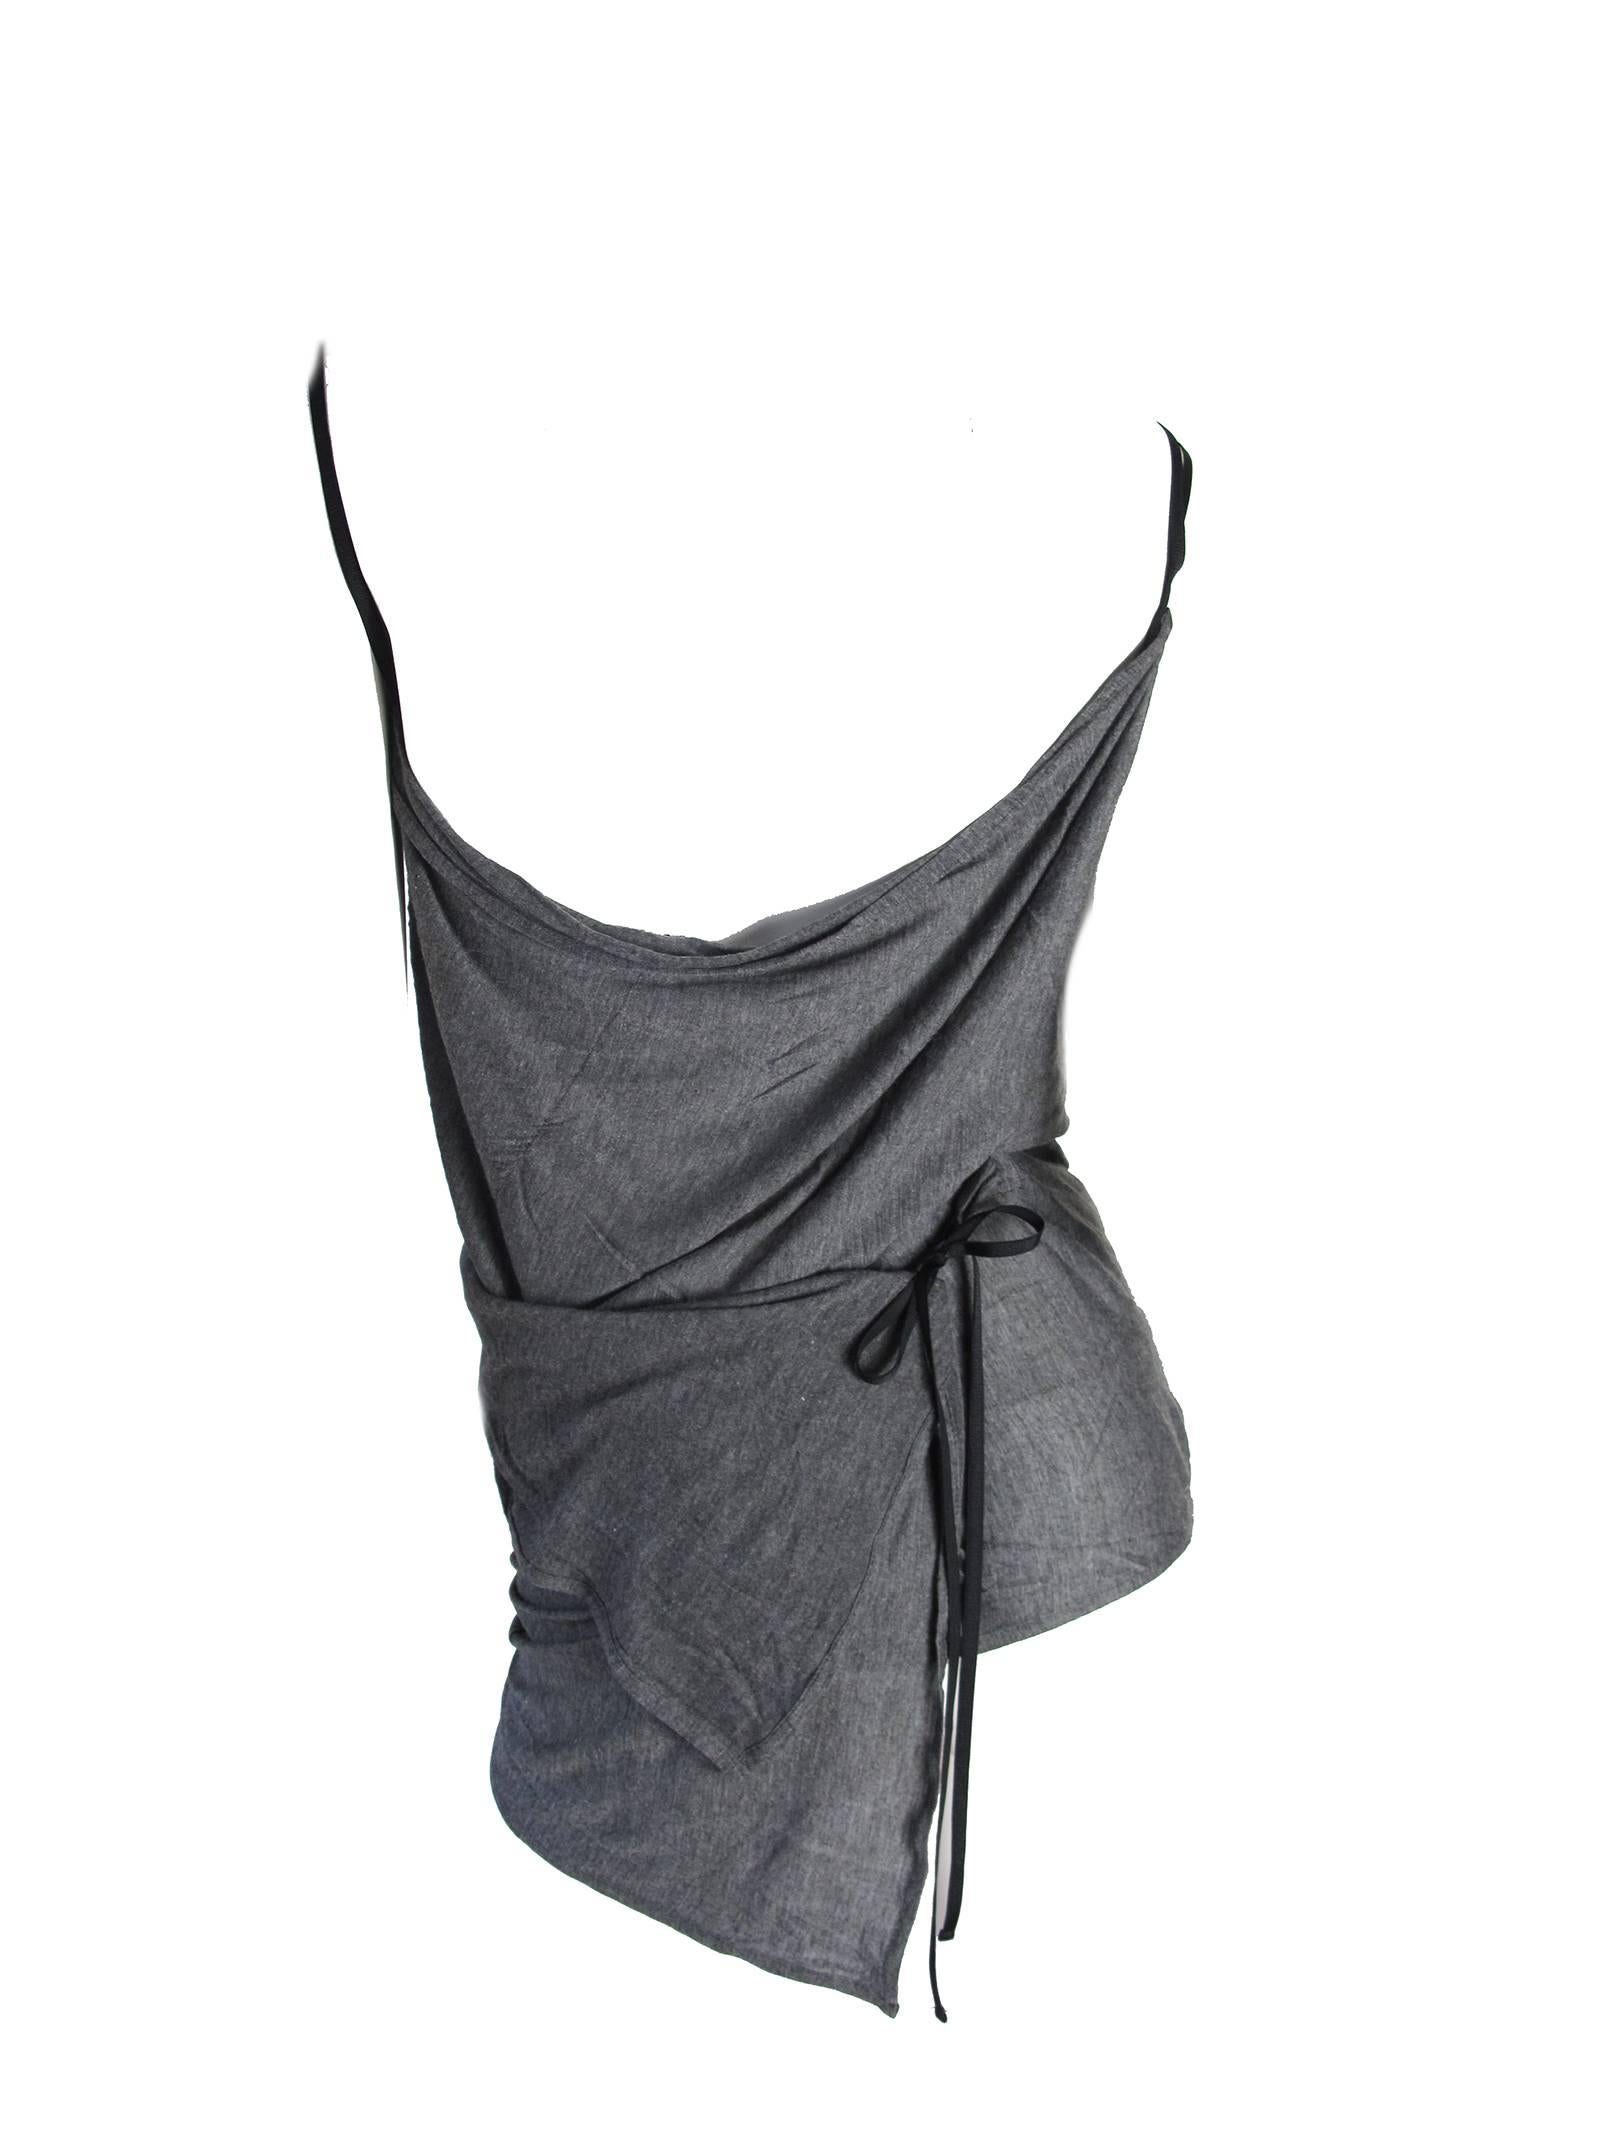 Ann Demeulemeester grey rayon tank top that wraps around twice and ties in back with matching wrap skirt.  Very interesting and wearable set.  Soft rayon fabric.  Condition: Excellent Size 40/ US 6 

We accept returns for refund, please see our